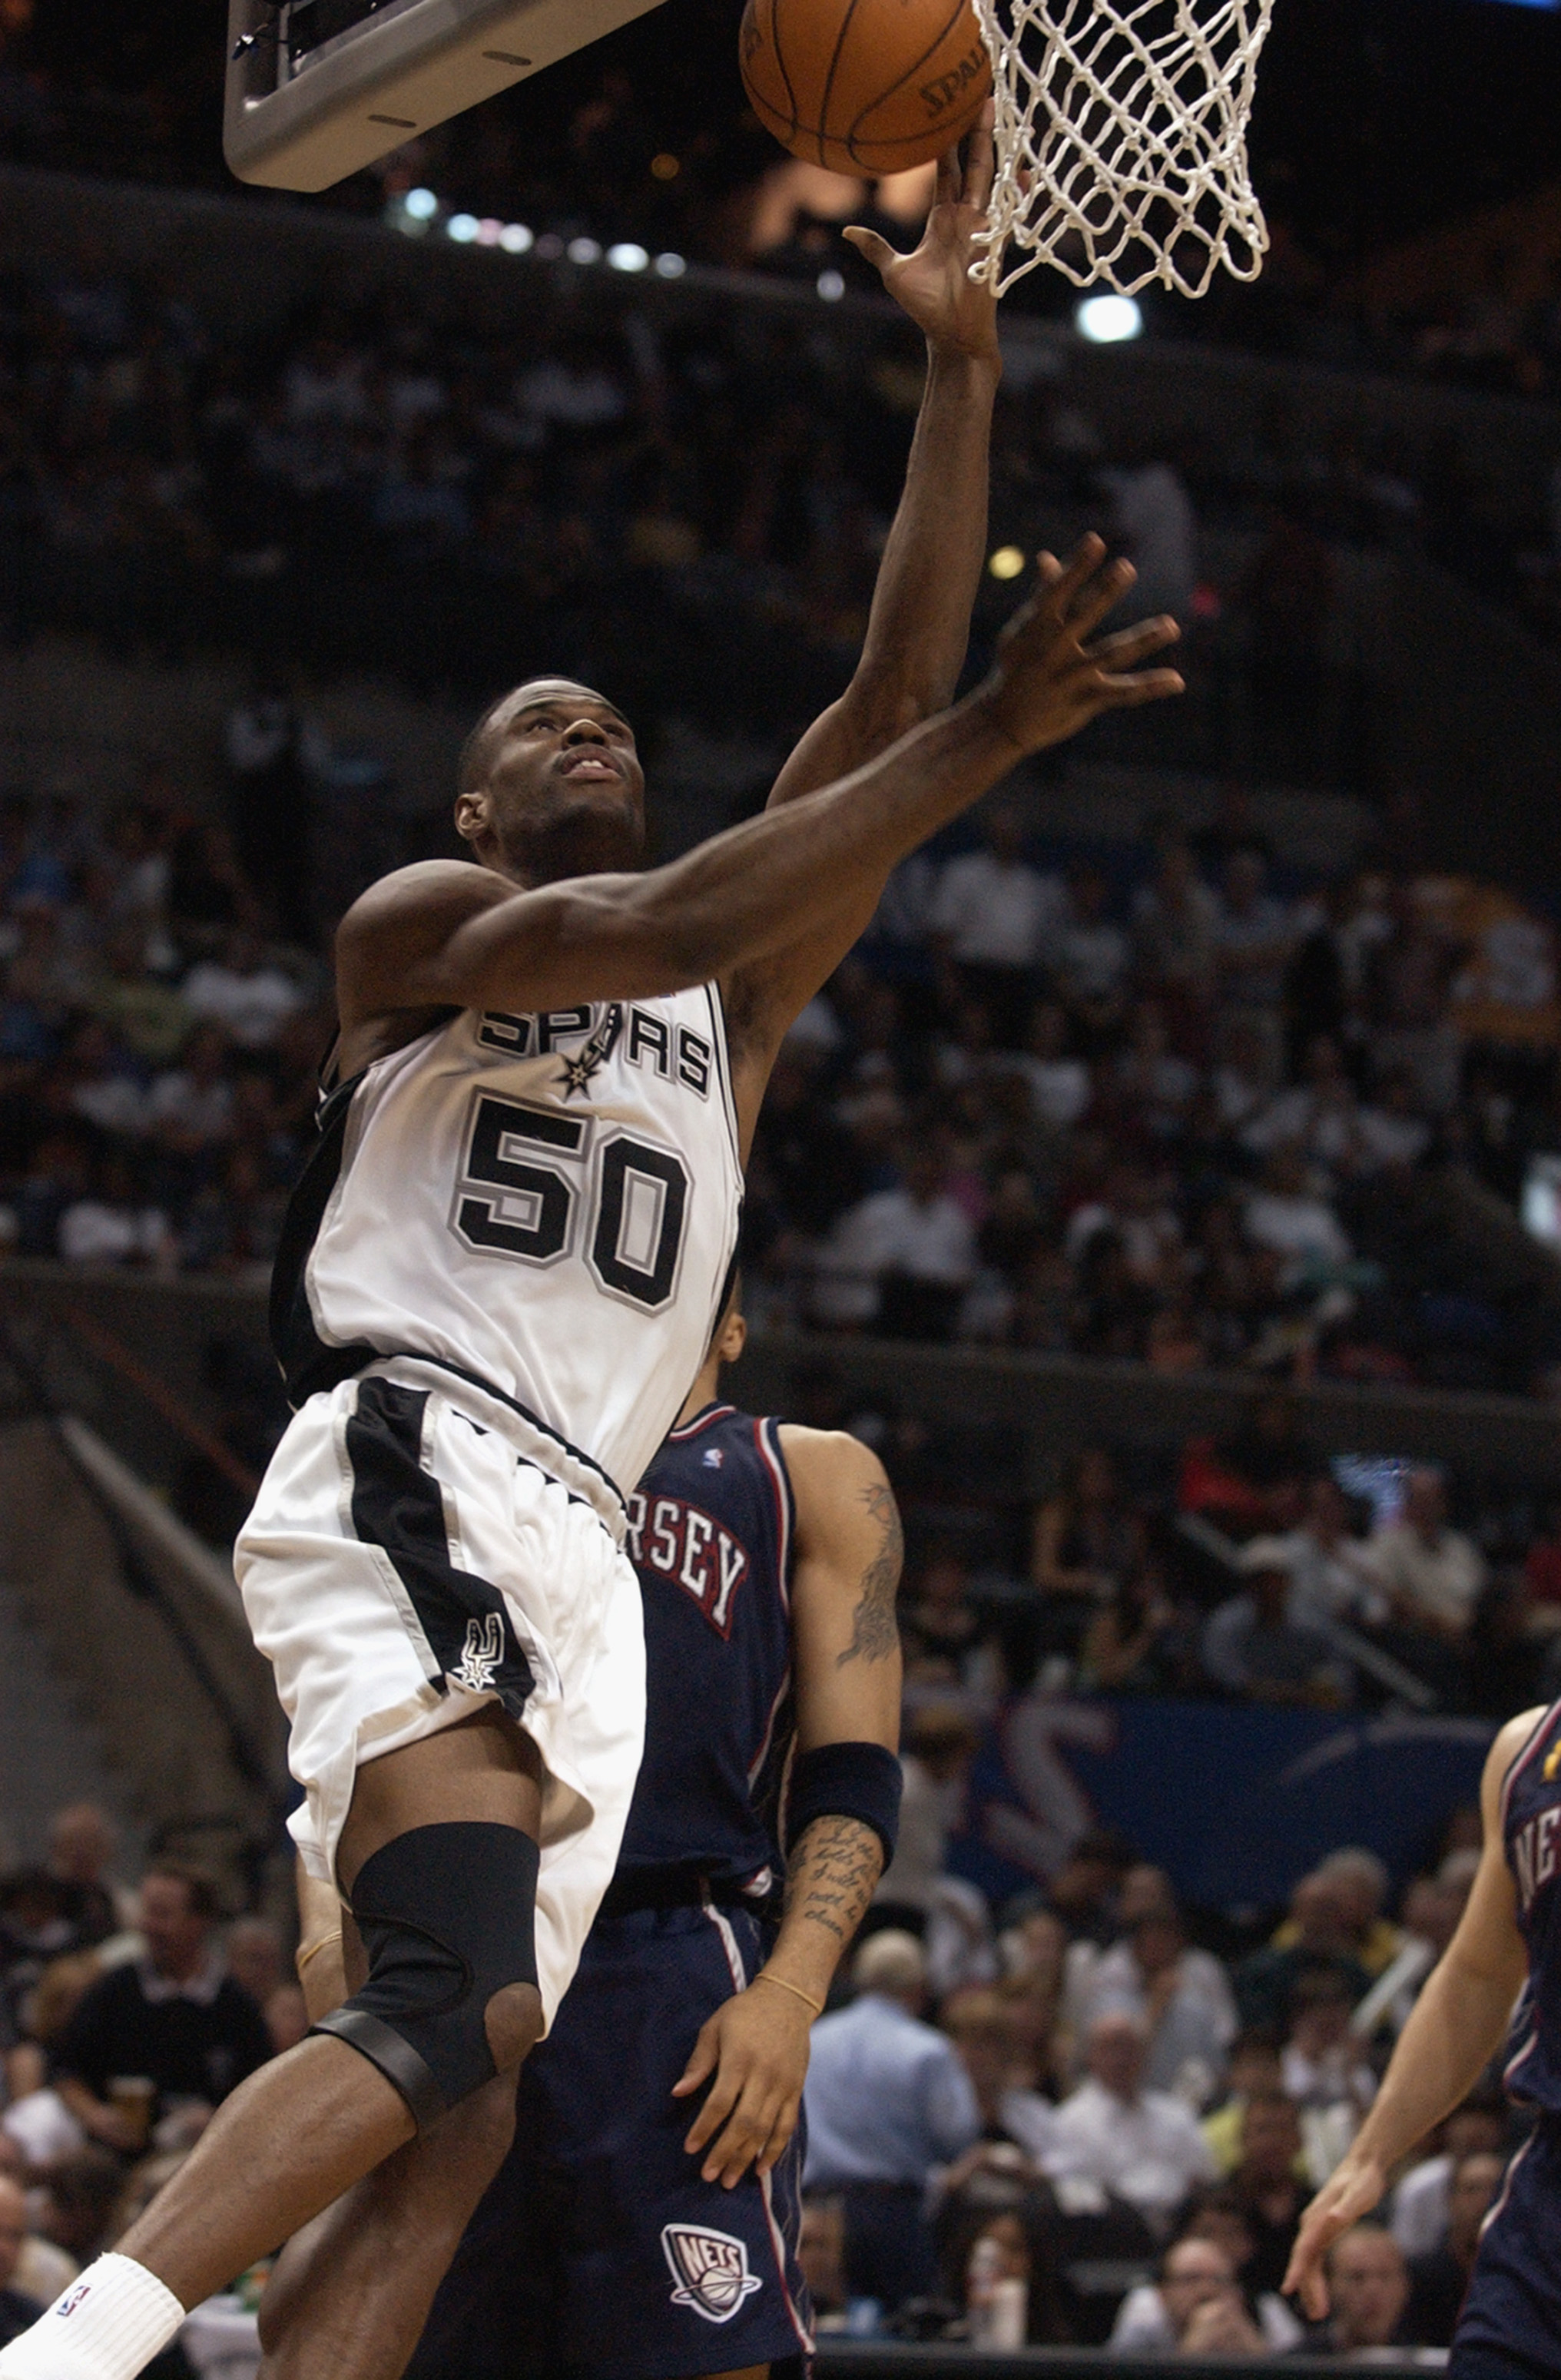 SAN ANTONIO - JUNE 6:  David Robinson #50 of the San Antonio Spurs shoots a layup during Game two of the 2003 NBA Finals against the New Jersey Nets at SBC Center on June 6, 2003 in San Antonio, Texas.  The Nets won 87-85.  NOTE TO USER: User expressly ac